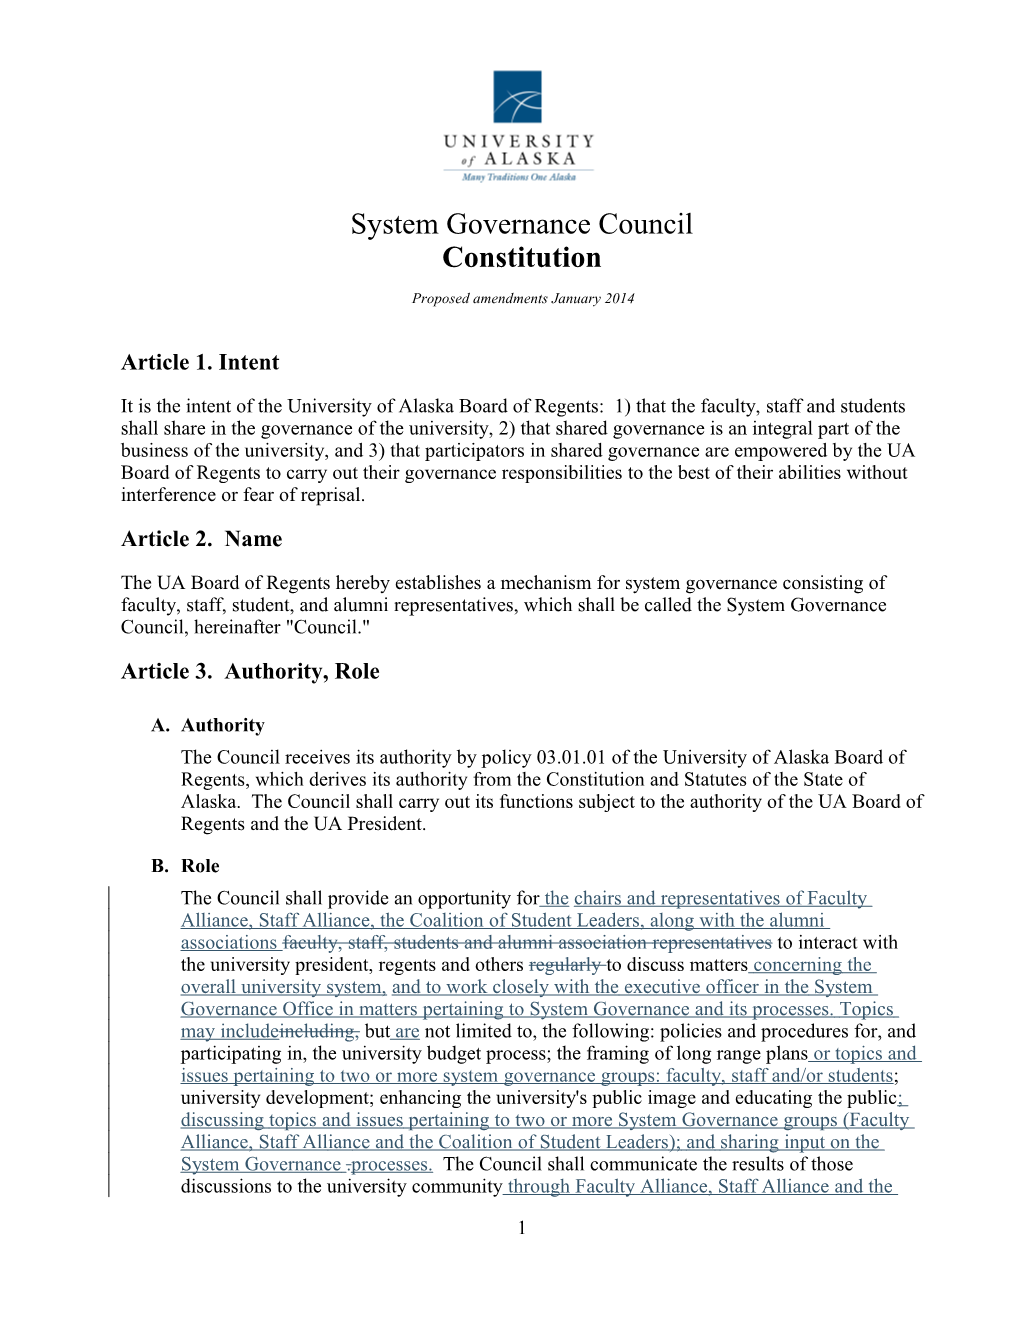 The System Governance Council